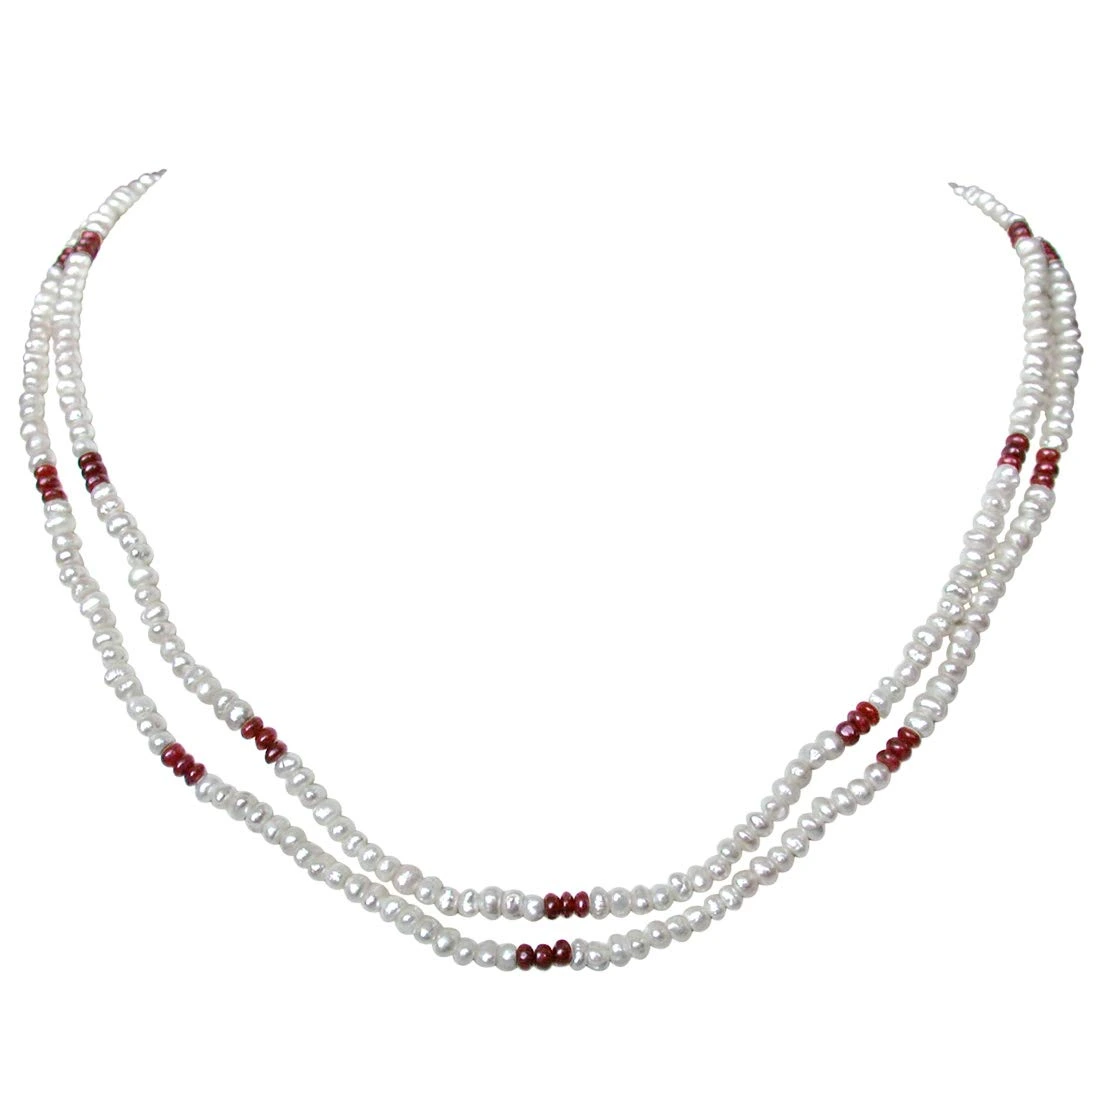 Embellishment - 2 Line Freshwater Pearl & Real Ruby Beads Necklace for Women (SN77)